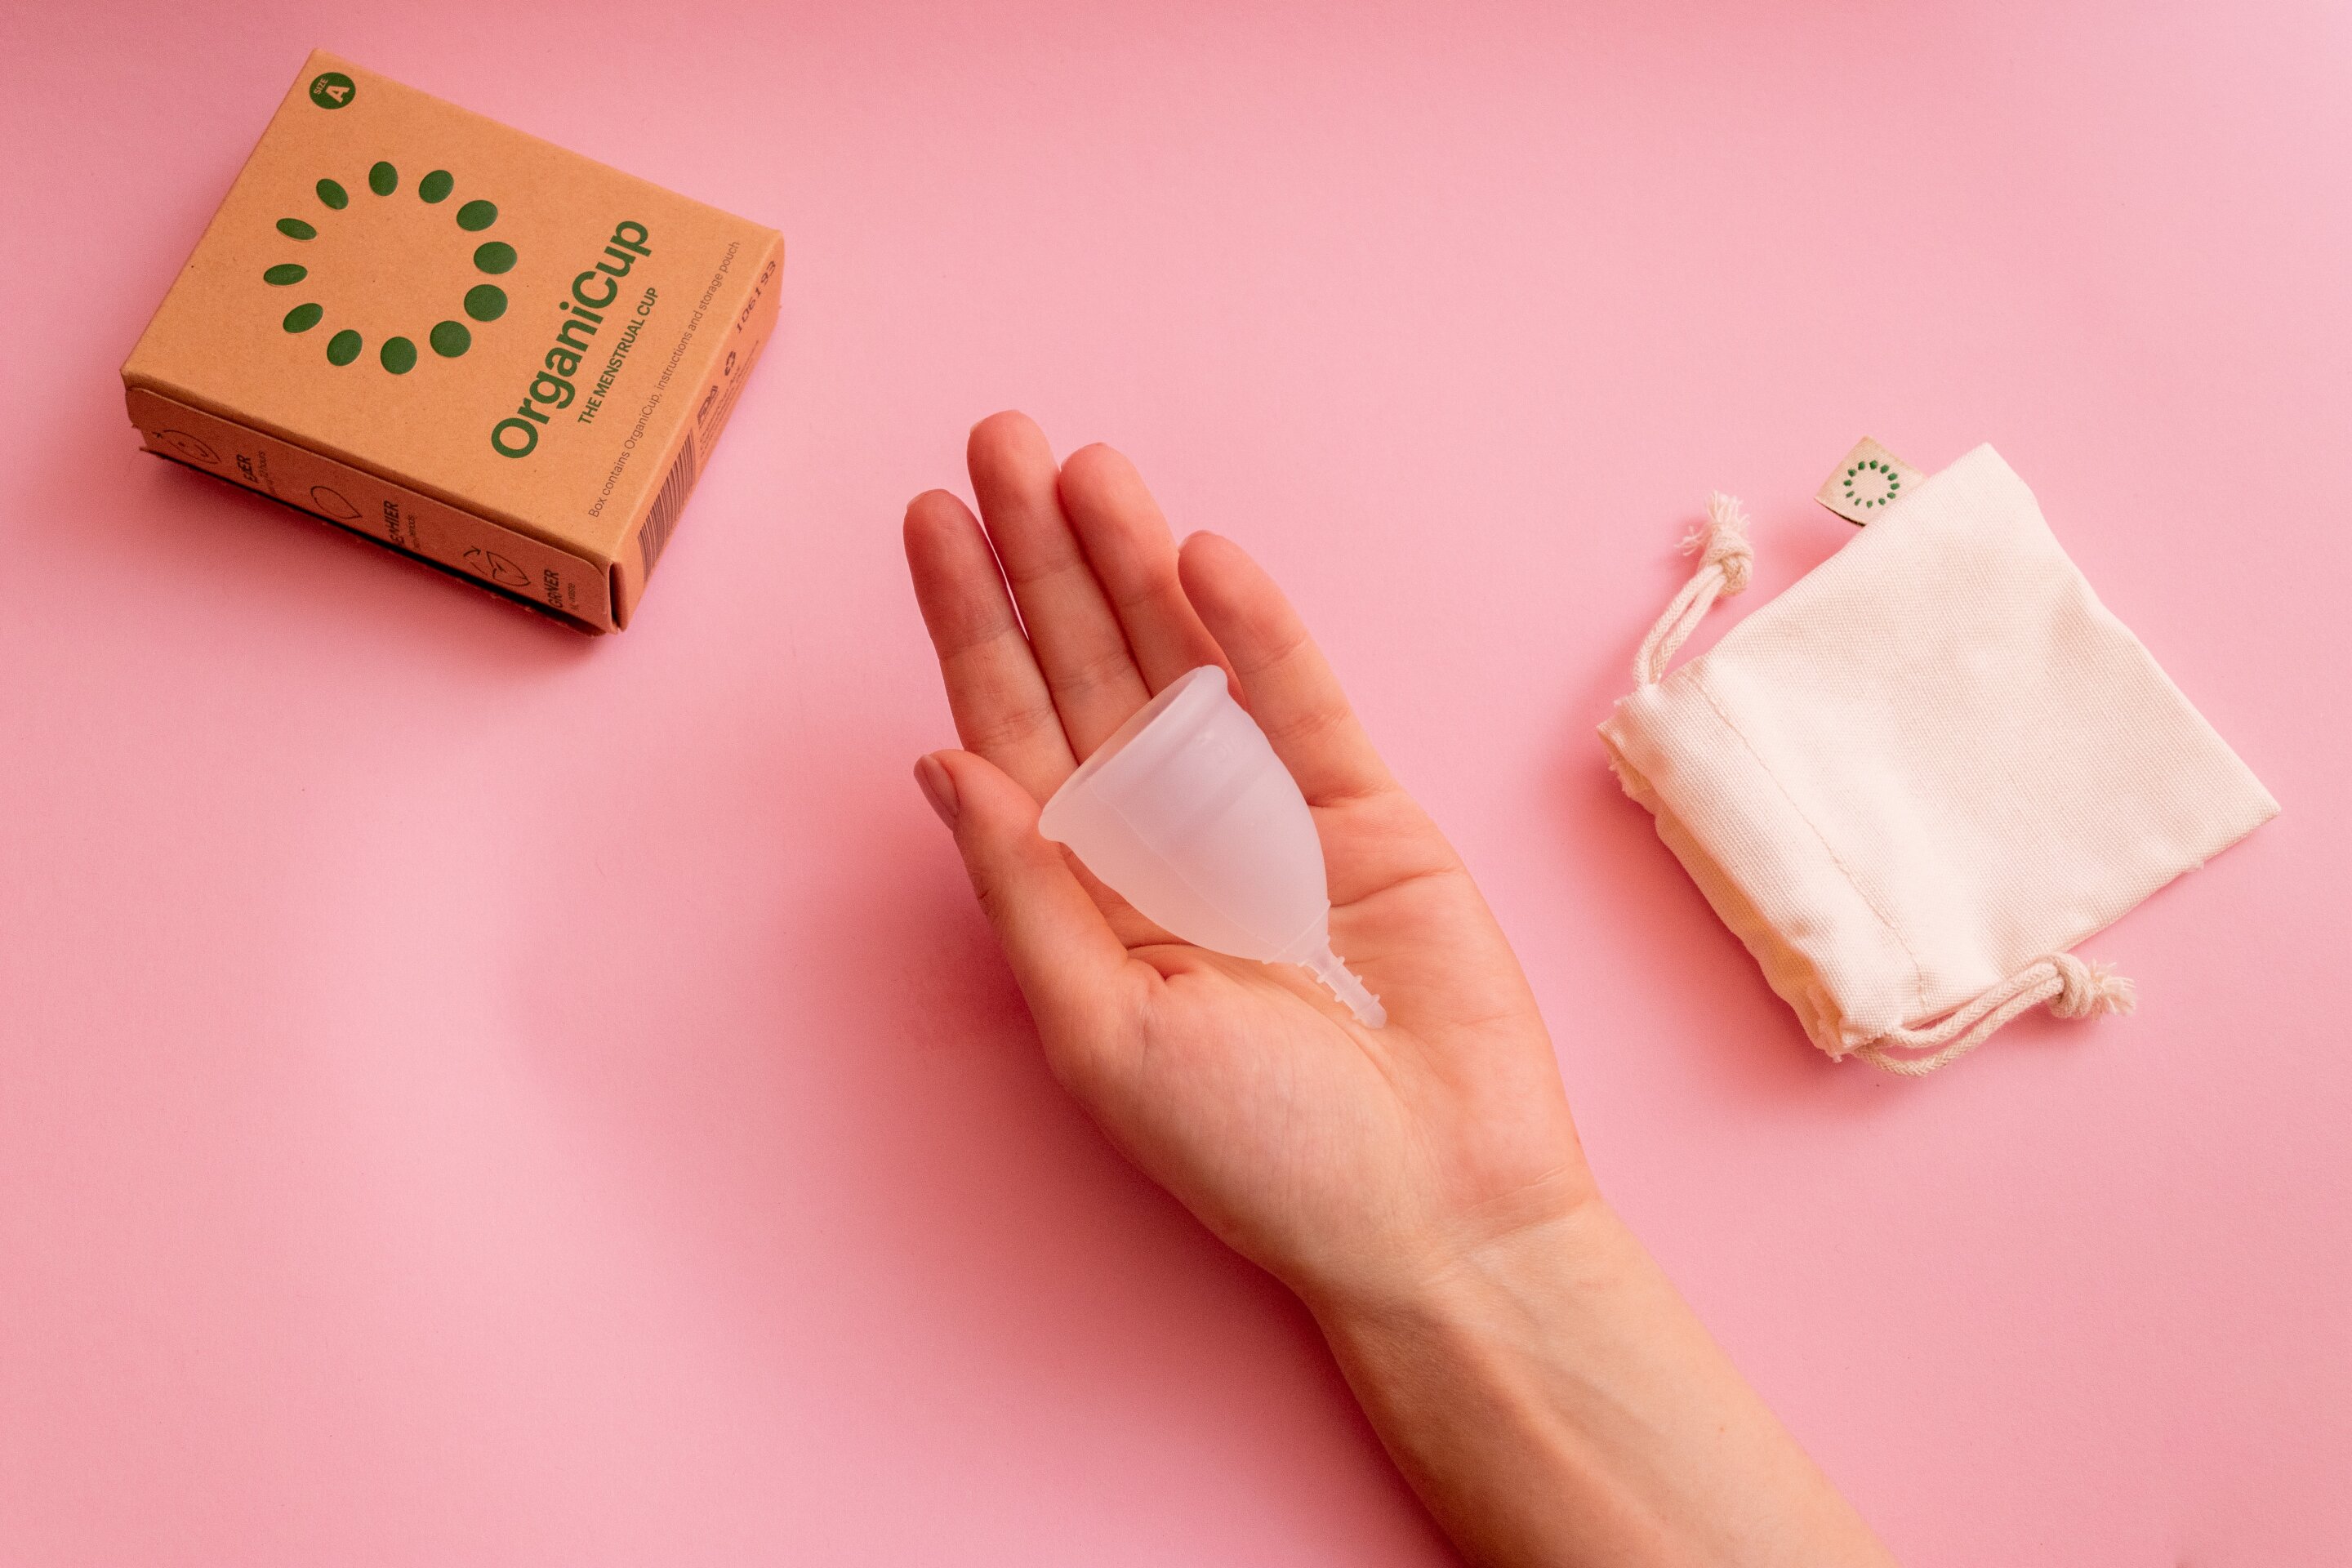 Menstrual cups are a cheaper, way for women to cope with periods than tampons or pads